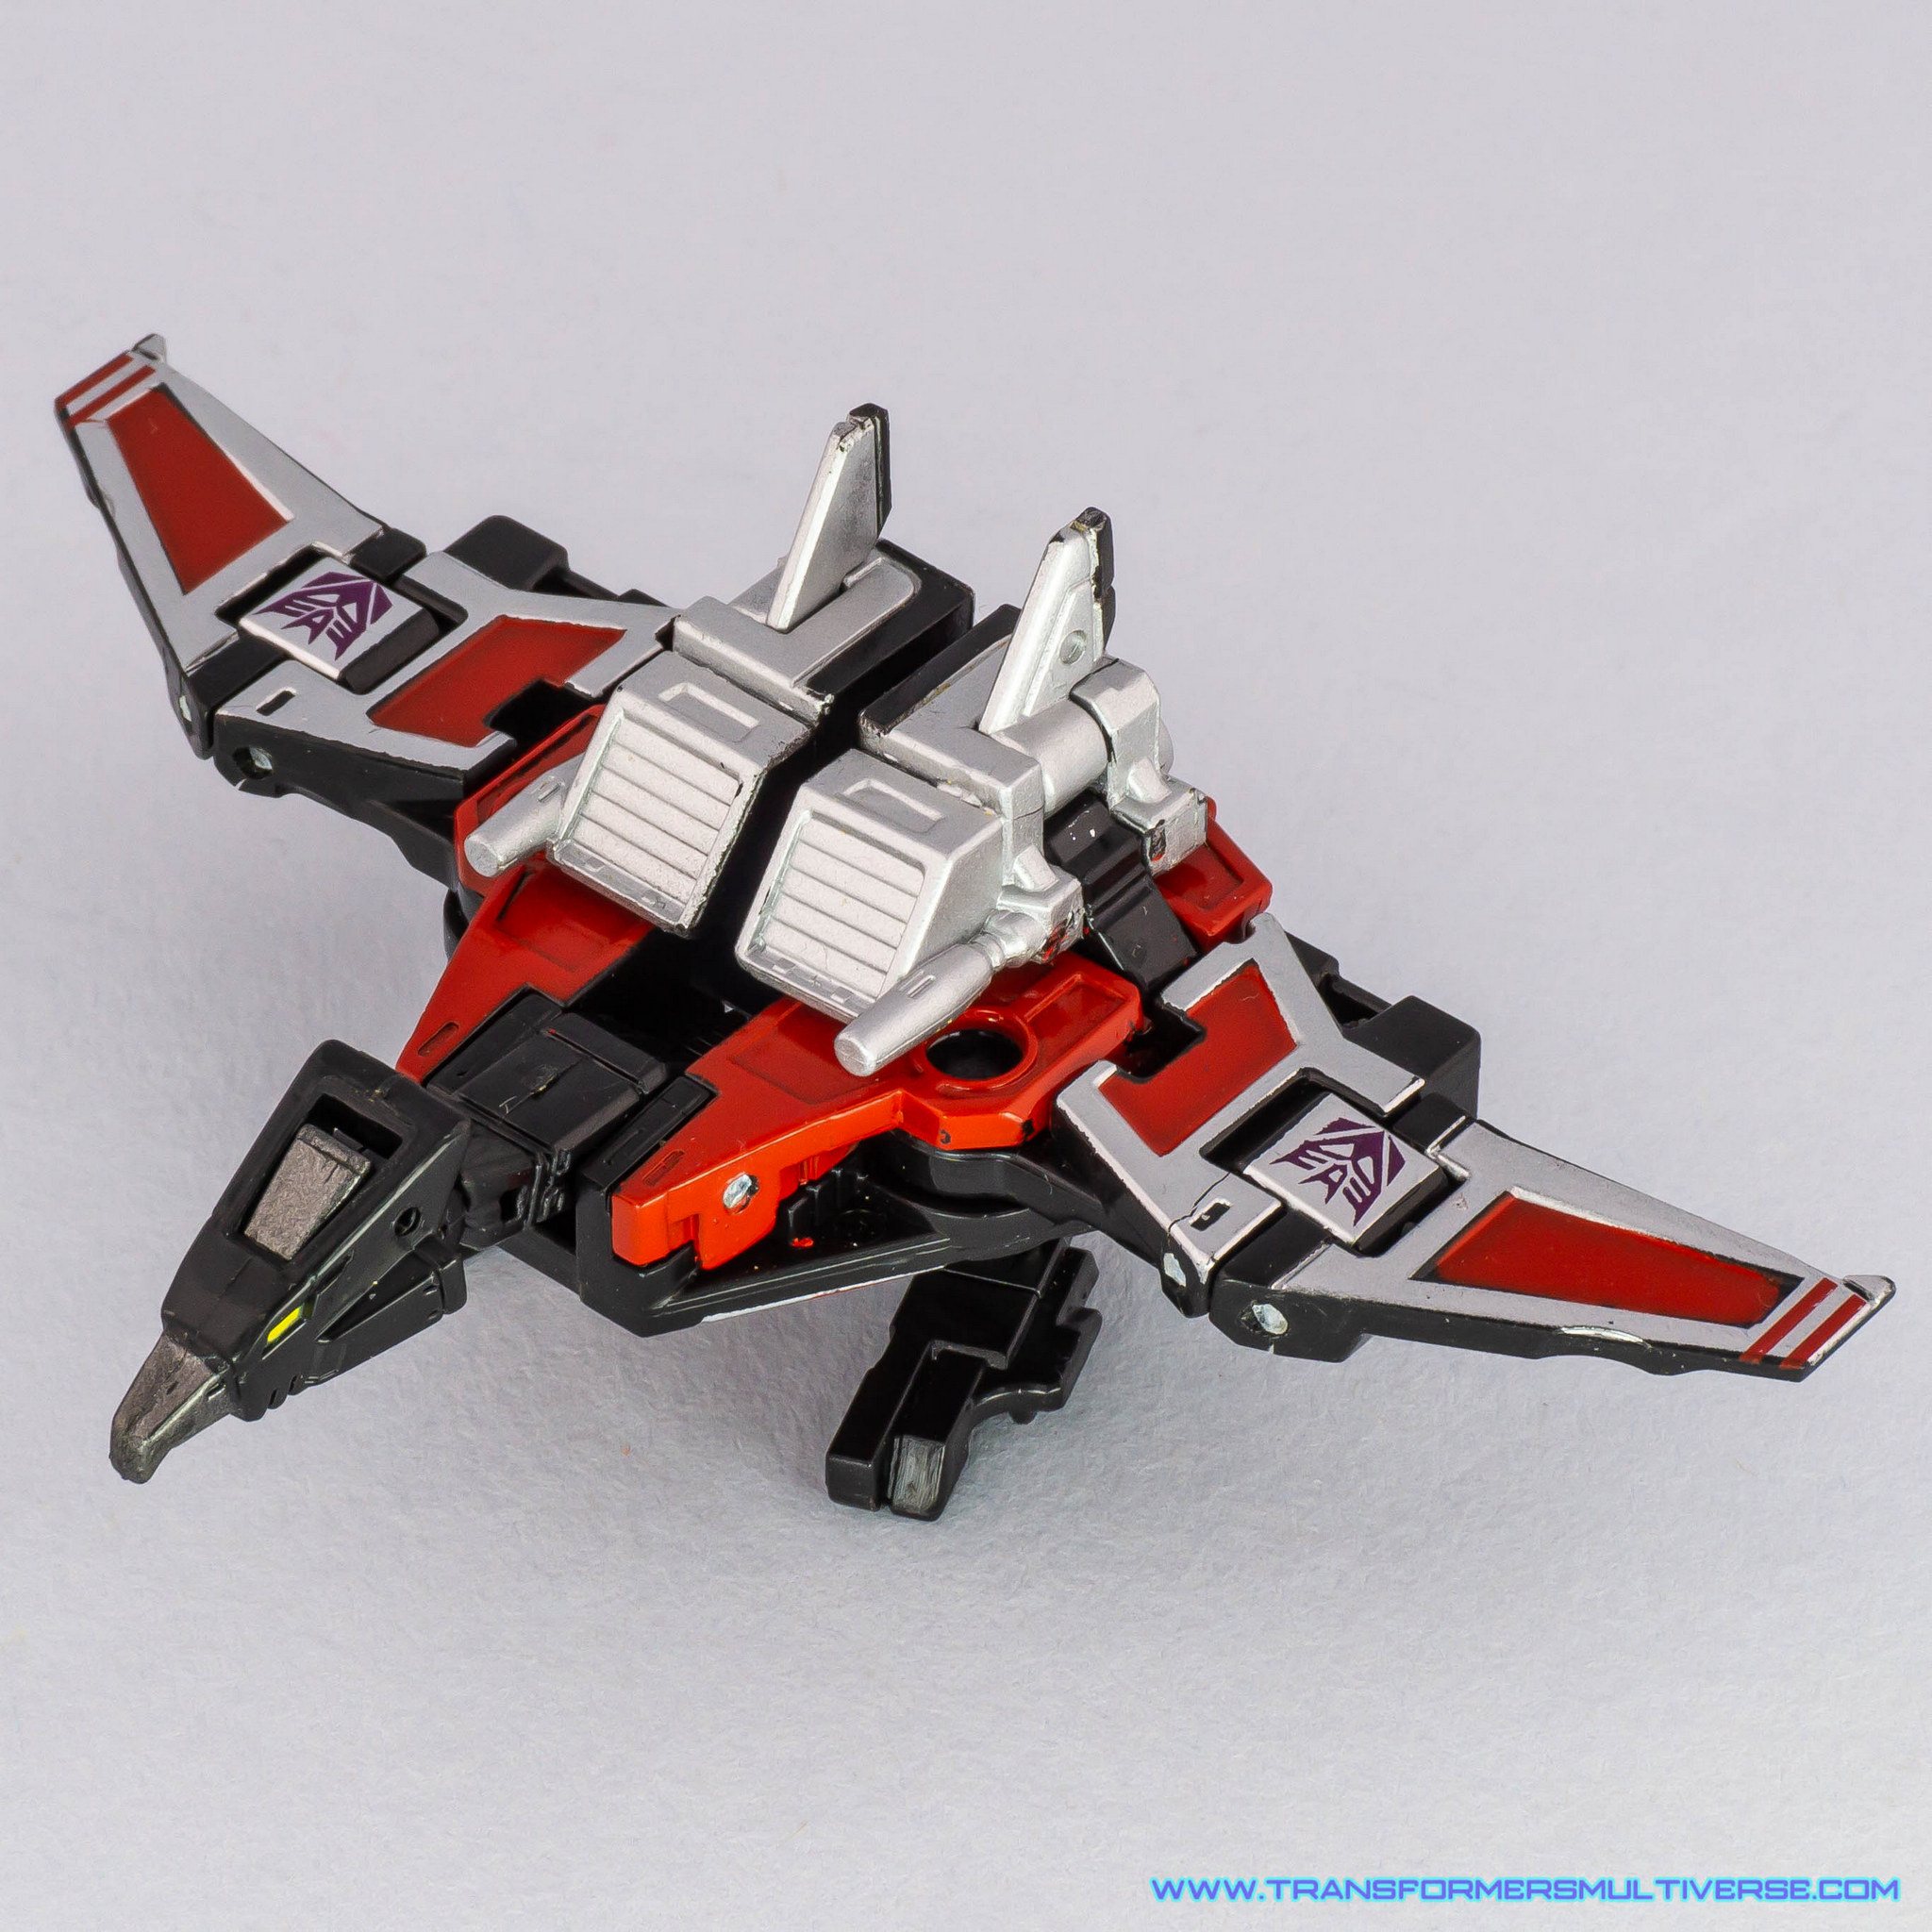 Transformers Masterpiece Laserbeak condor mode, view from above